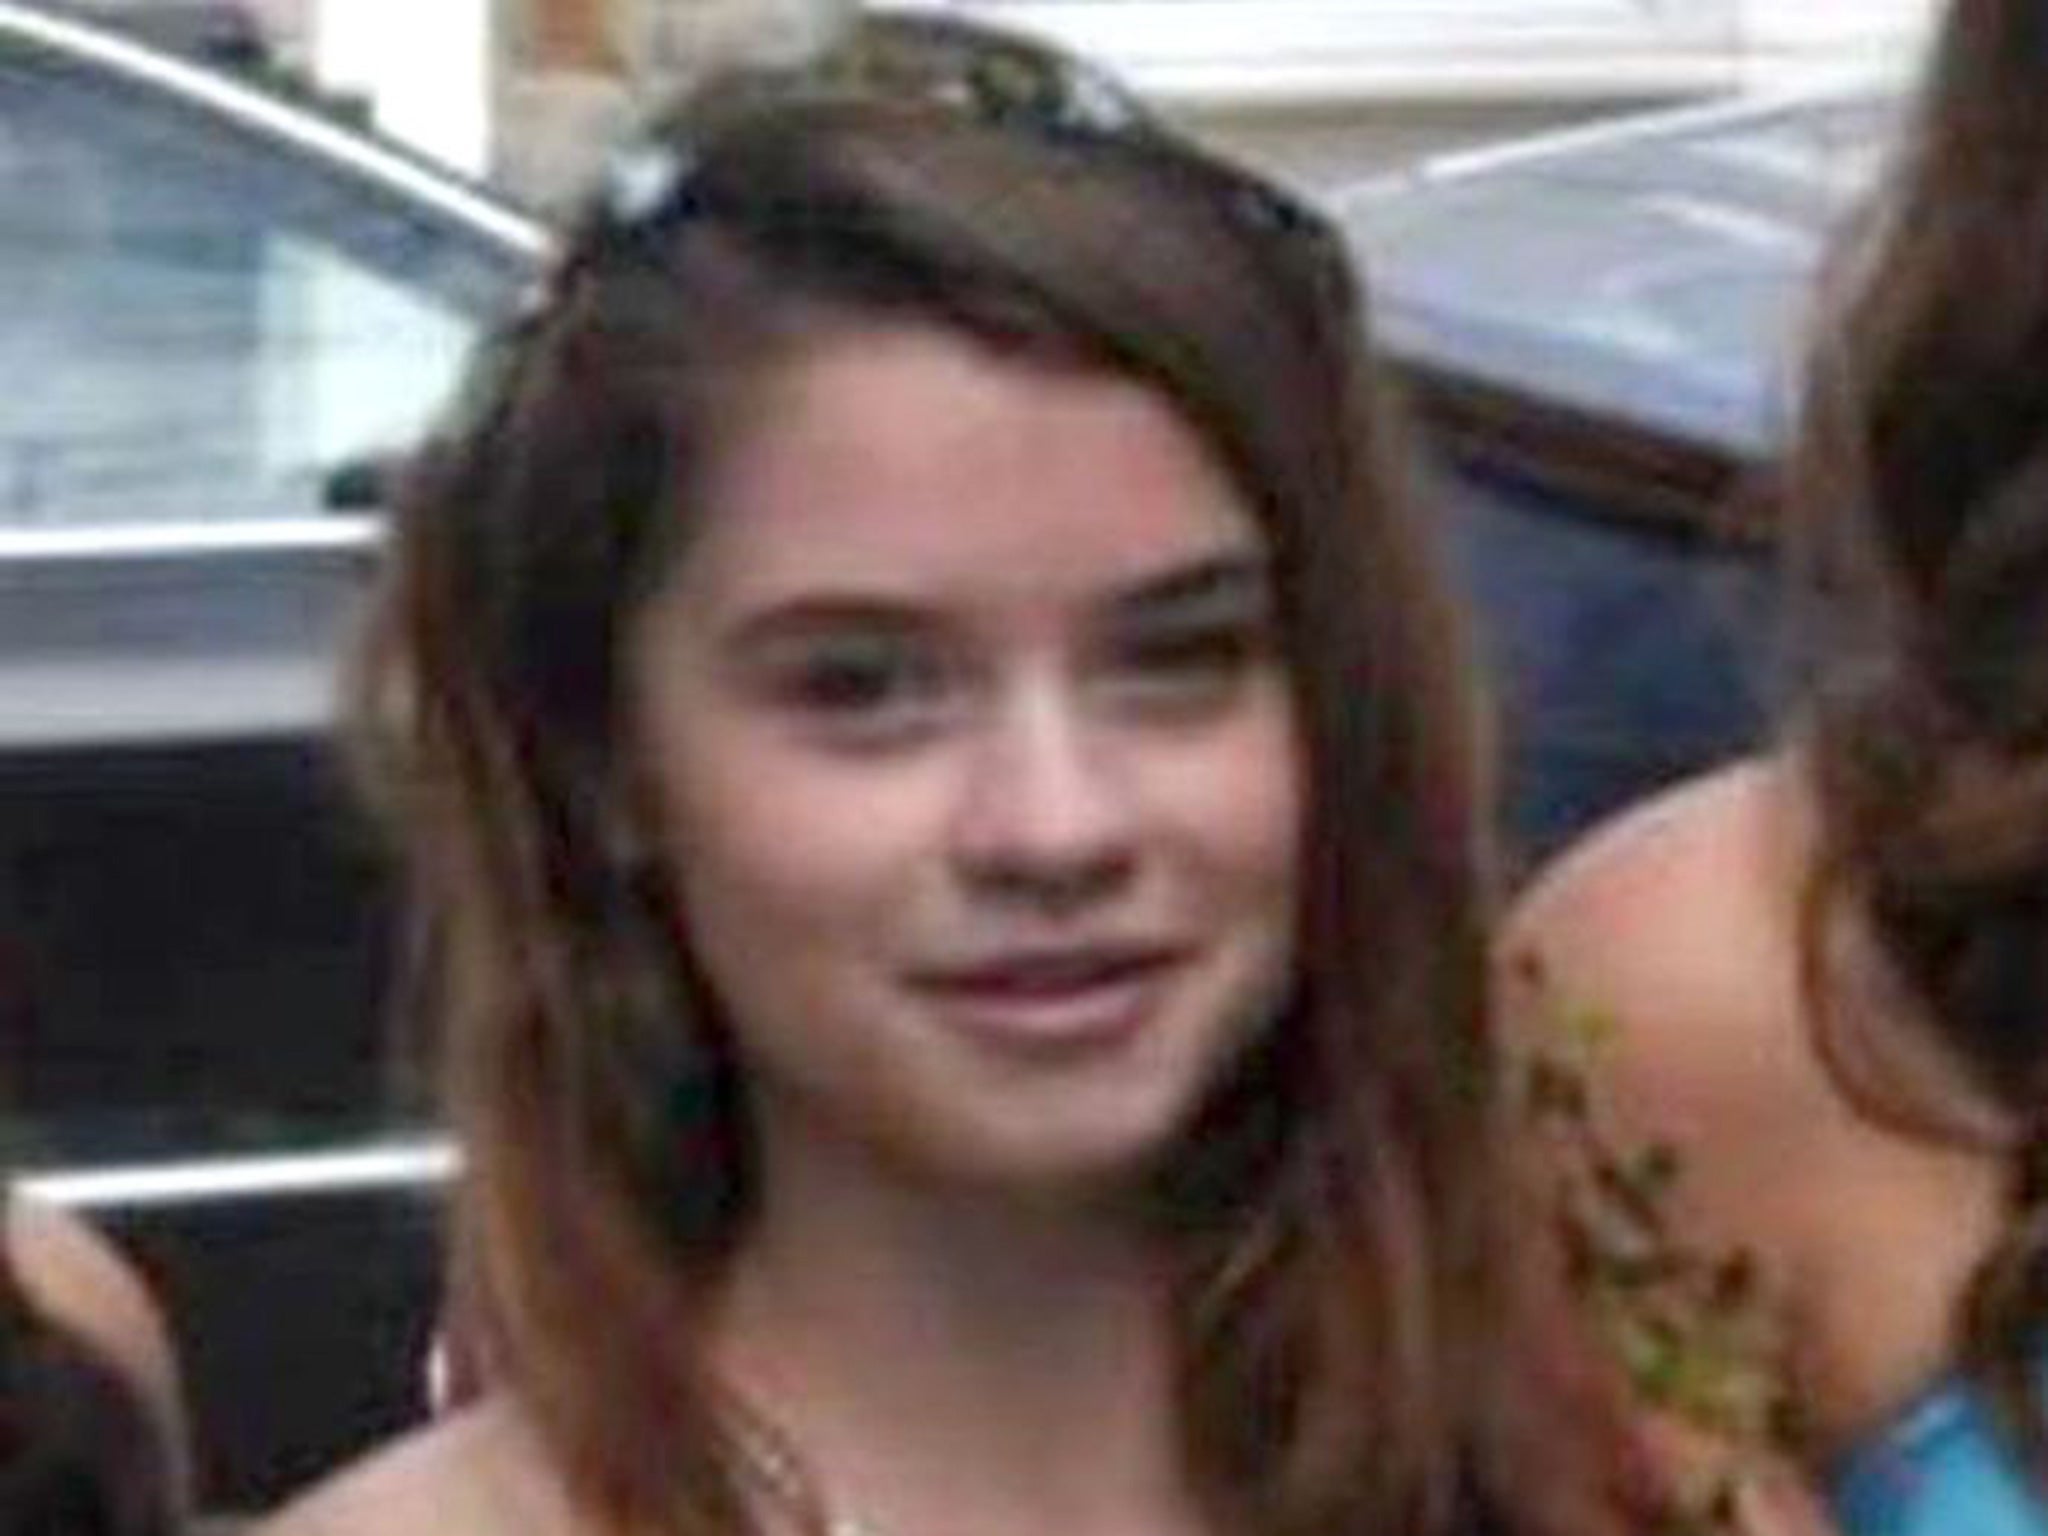 Becky Watts was killed on 19 February